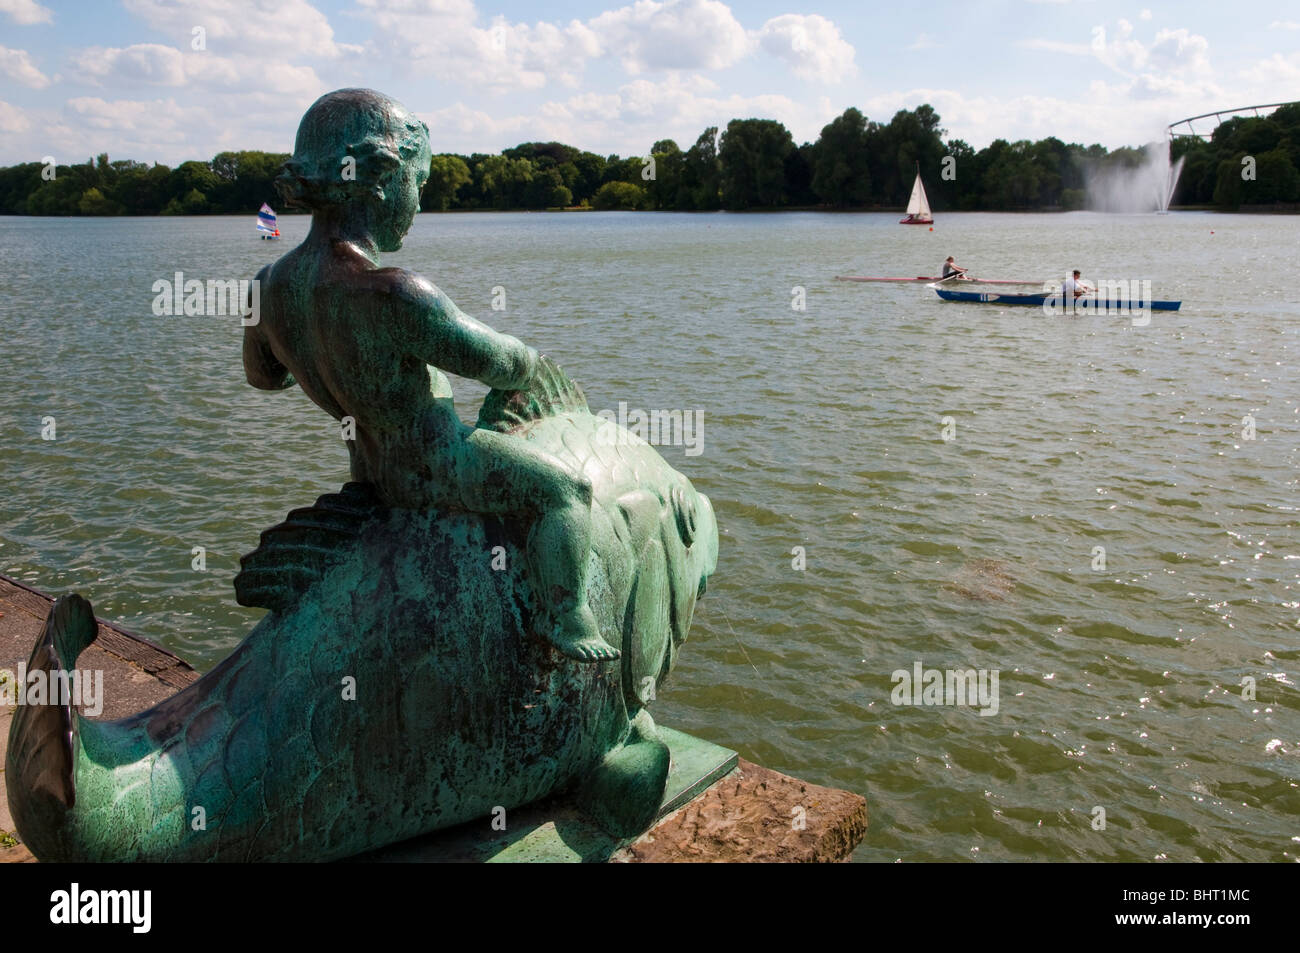 Hannover, Masch Lake, putto on the fish, sculpture from 1936, Germany Stock Photo